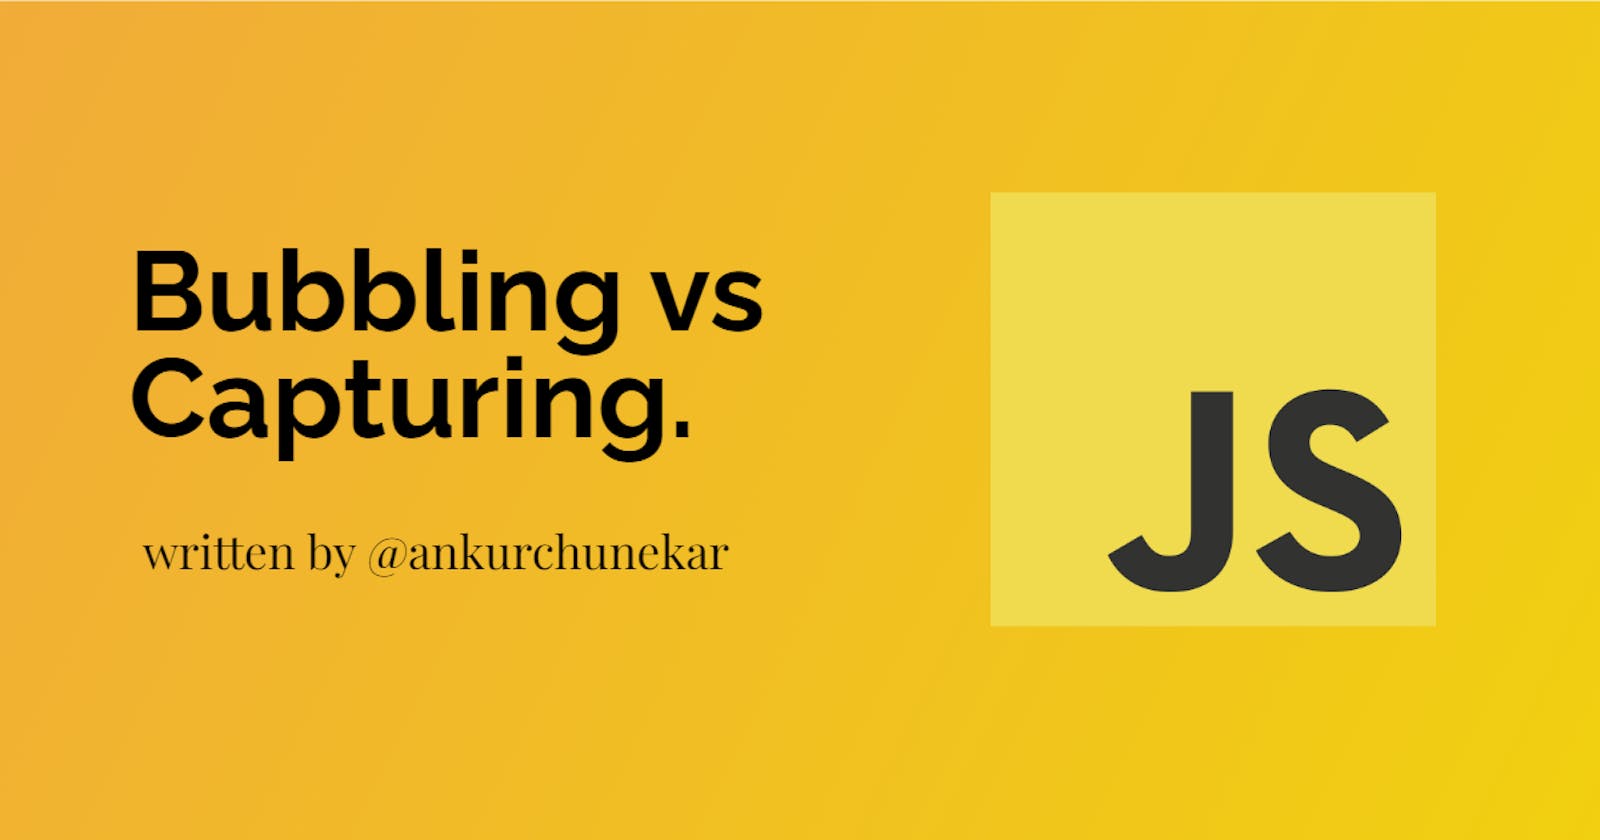 Event Bubbling v/s Capturing in JavaScript.